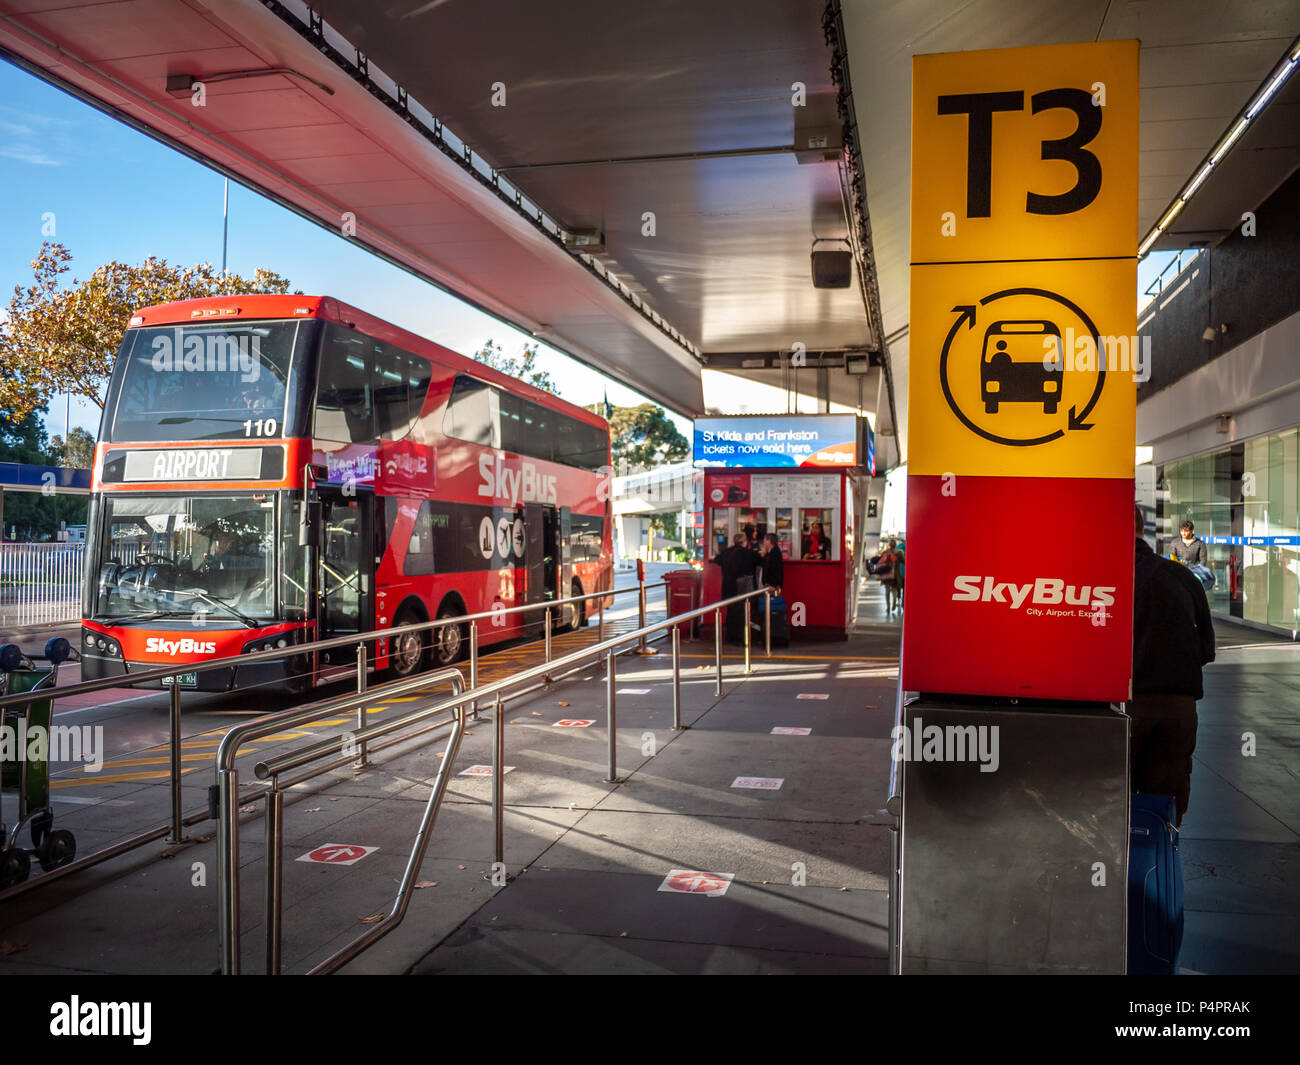 Sign of Skybus stop in Terminal 3 of Tullamarine airport. Melbourne, Victoria/Australia. Skybus is an airport bus service operating in Melbourne. Stock Photo